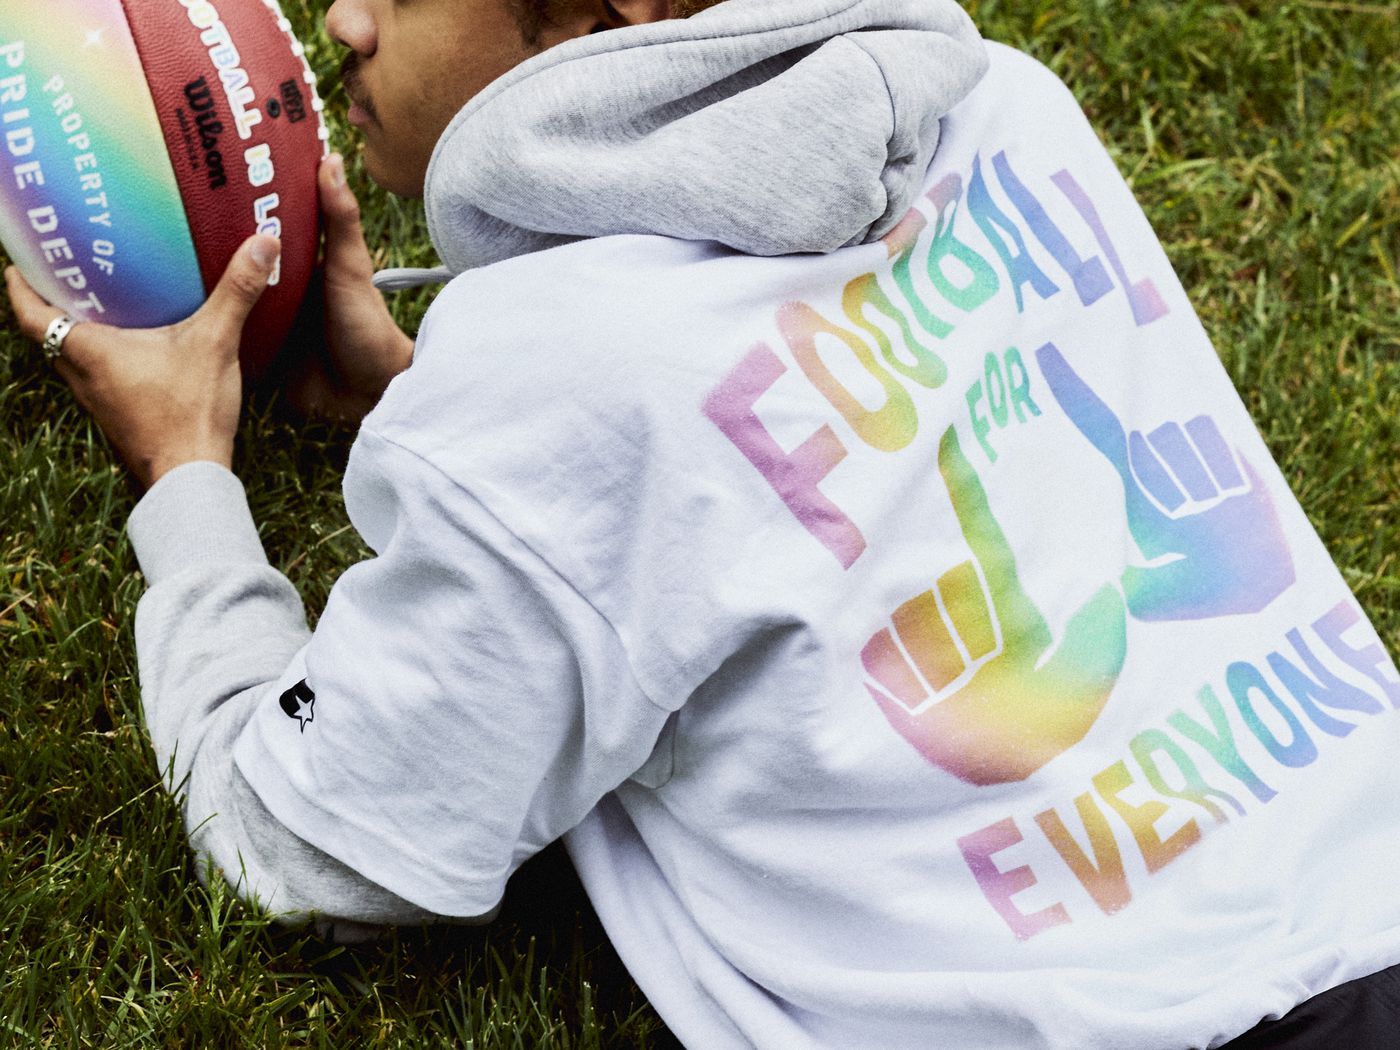 NFL has an entire line of Pride items including a half-rainbow